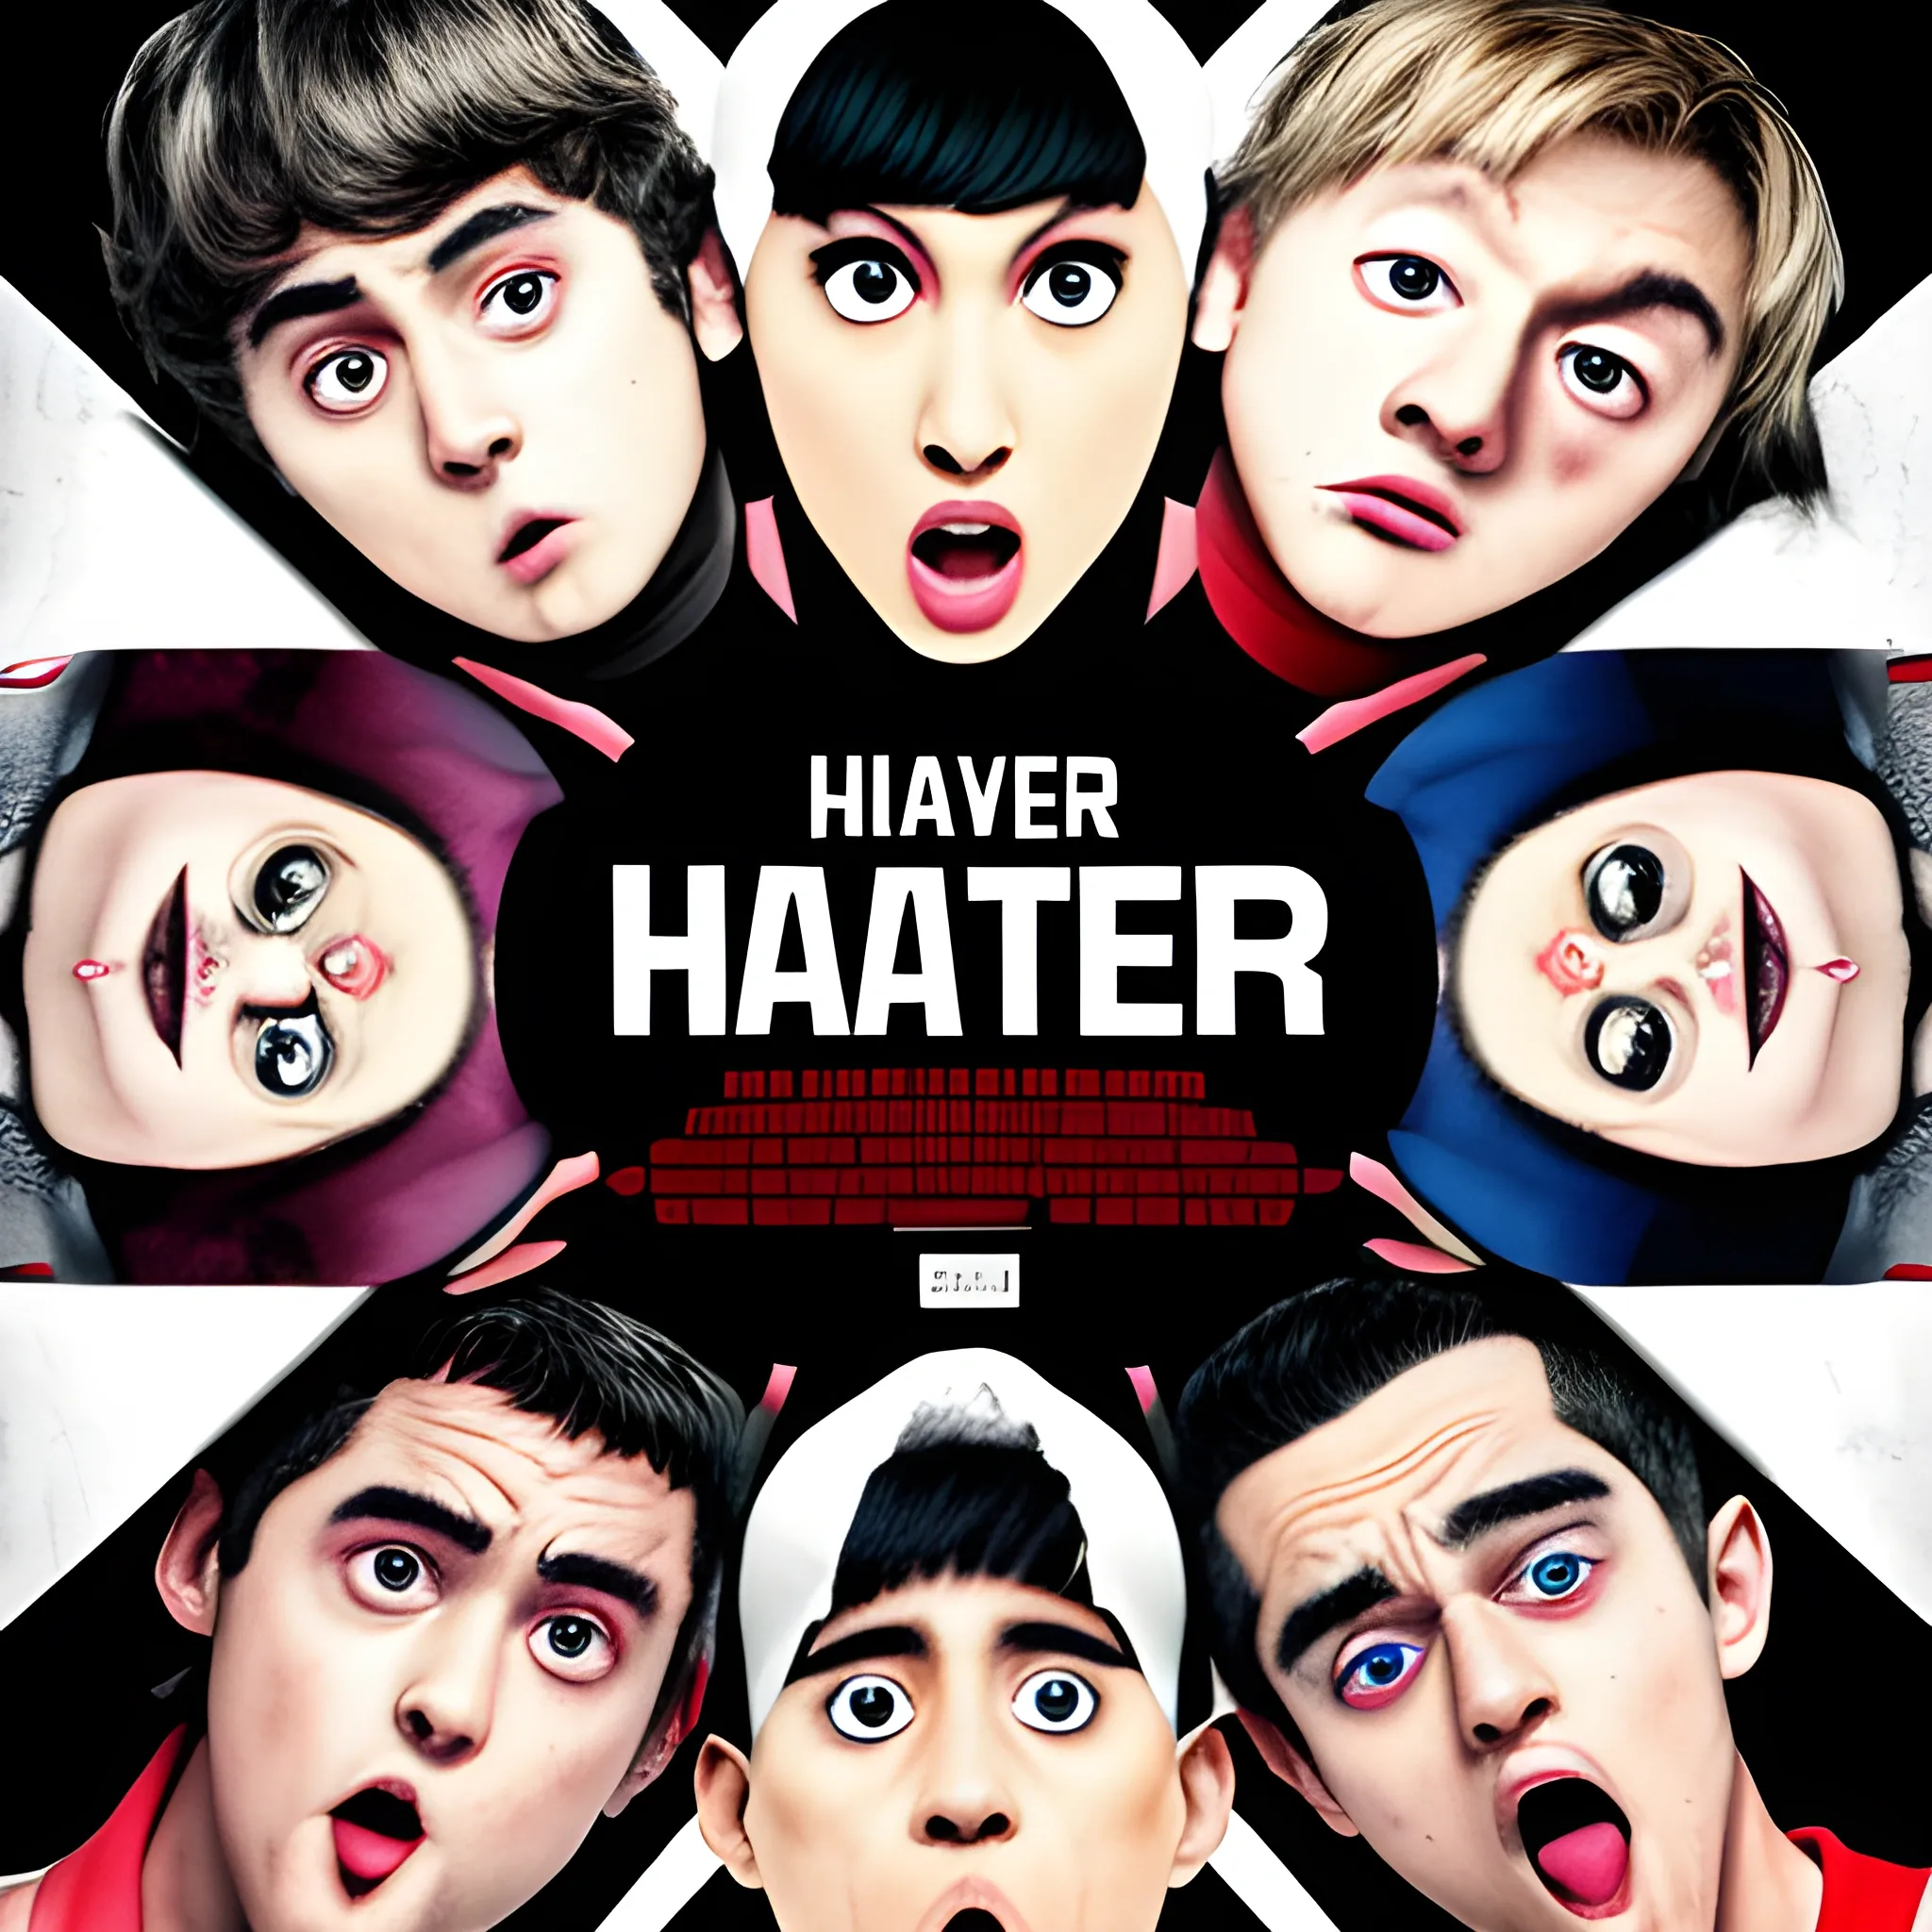 YouTuber hater movie poster 